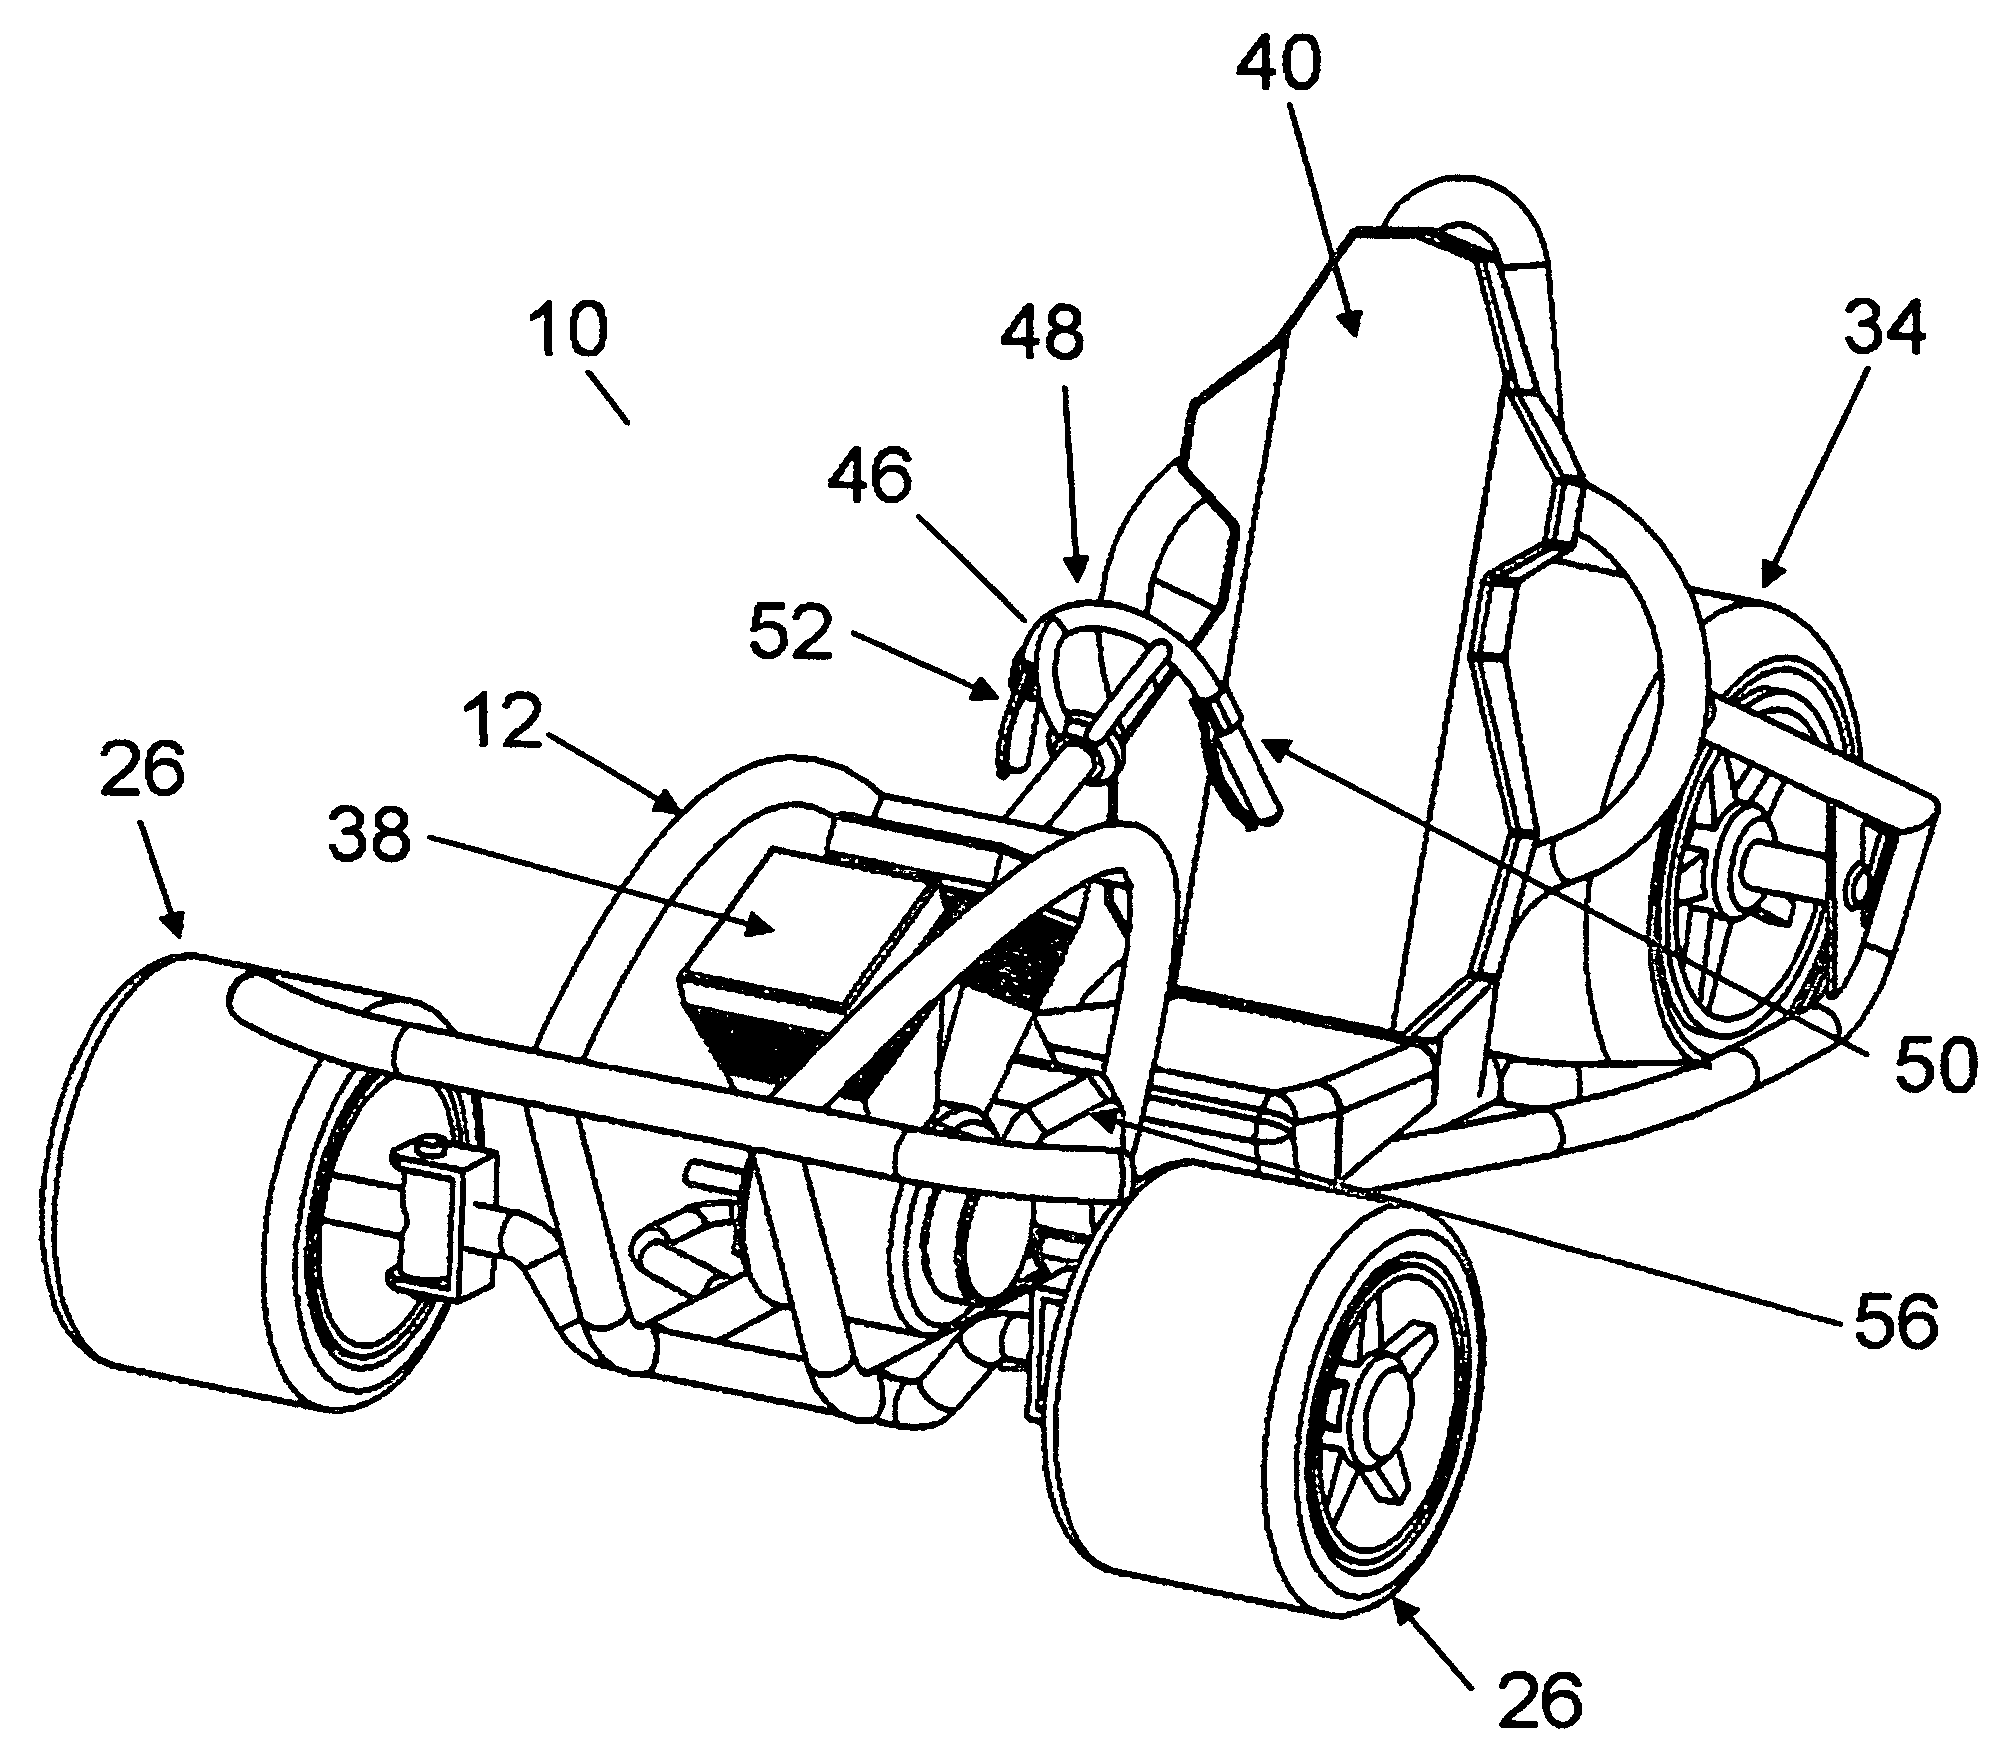 Three-wheeled vehicle with centrally positioned motor and driver's seat